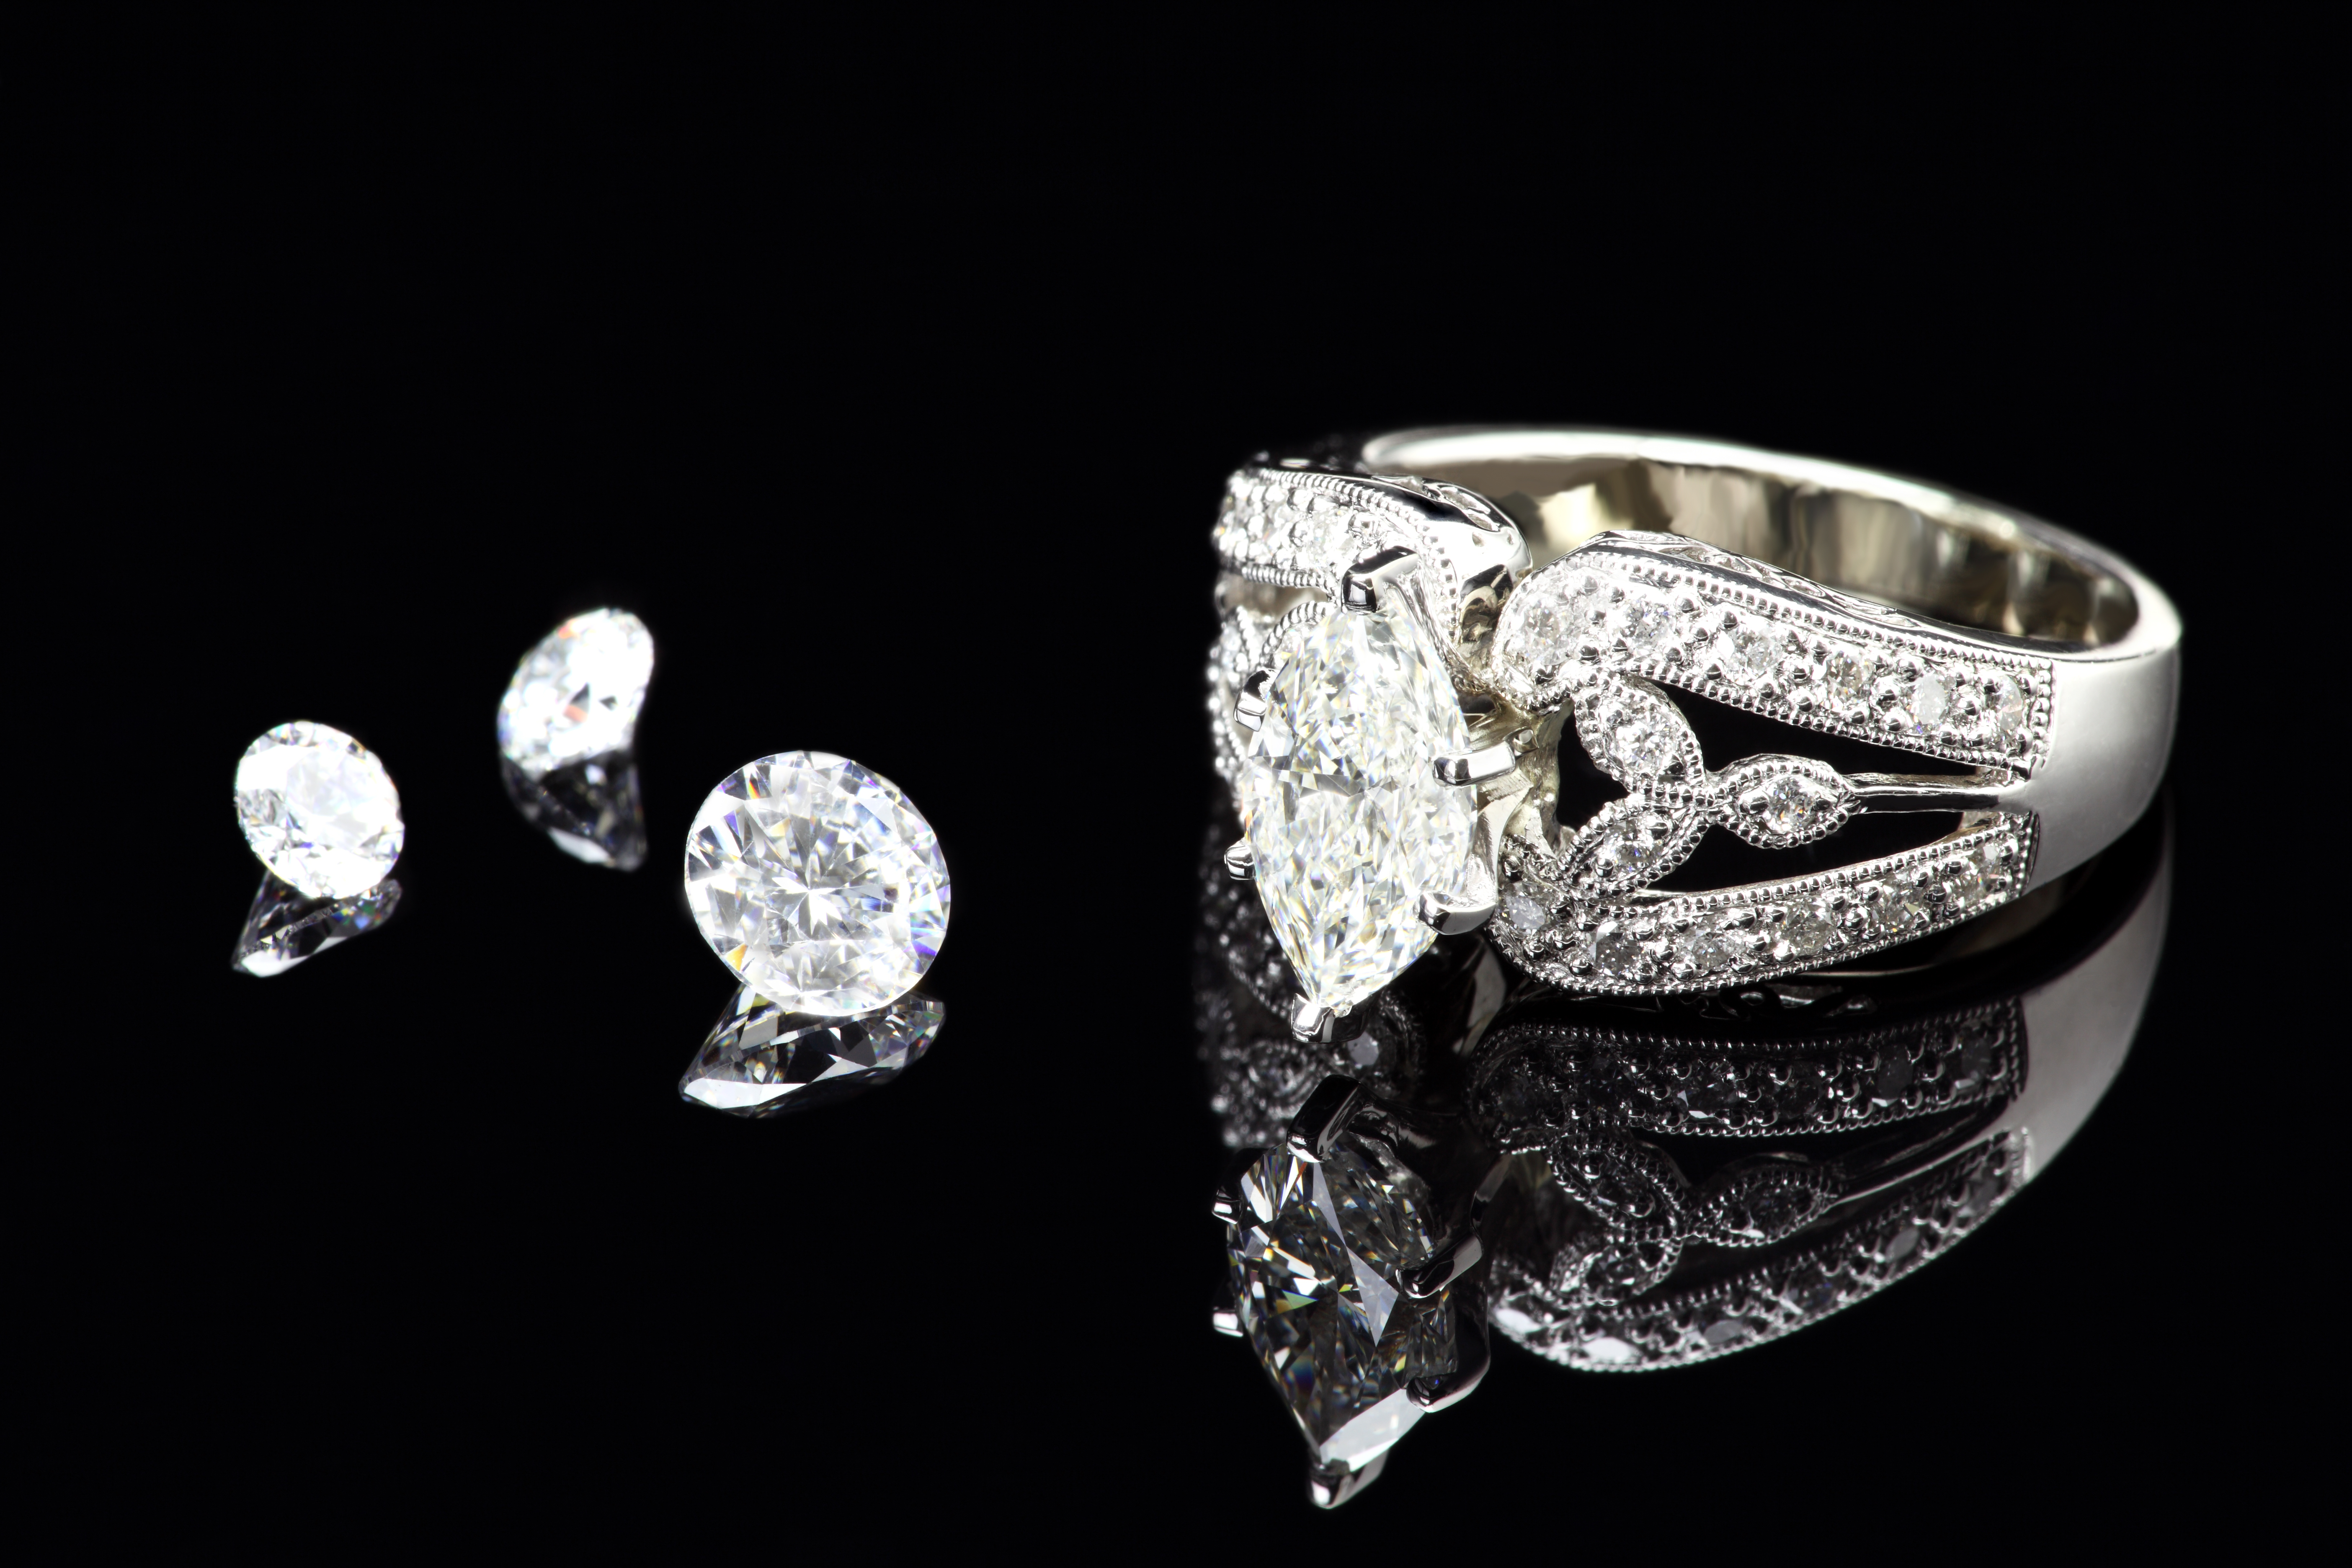 Diamond Ring with diamonds scattered | Source: Getty Images